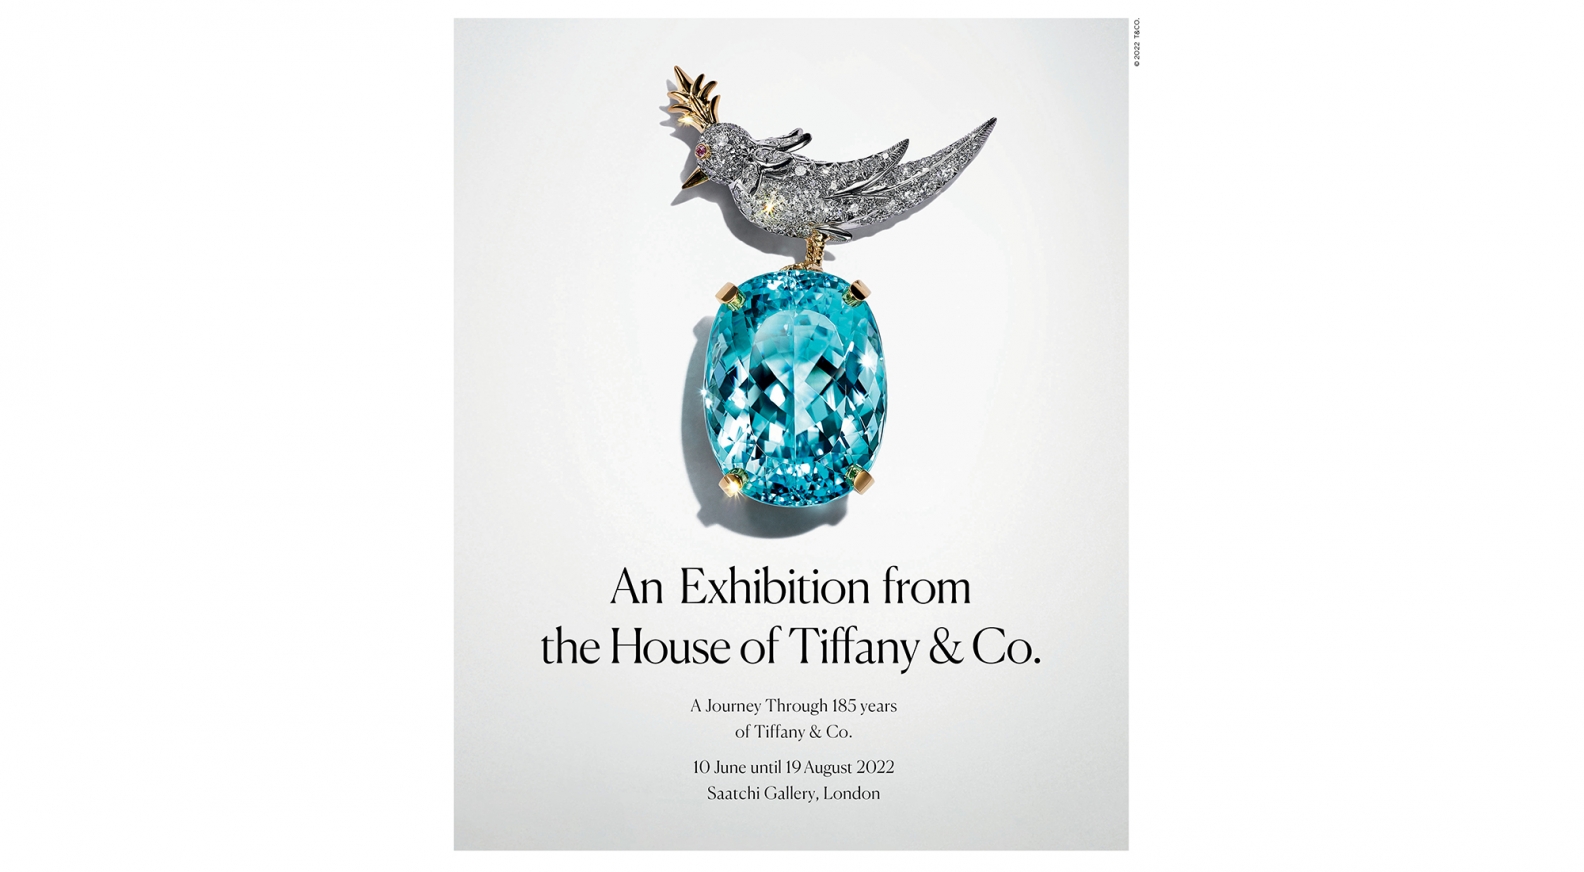 Tiffany & Co.'s brand exhibition, Vision & Virtuosity, arrives in